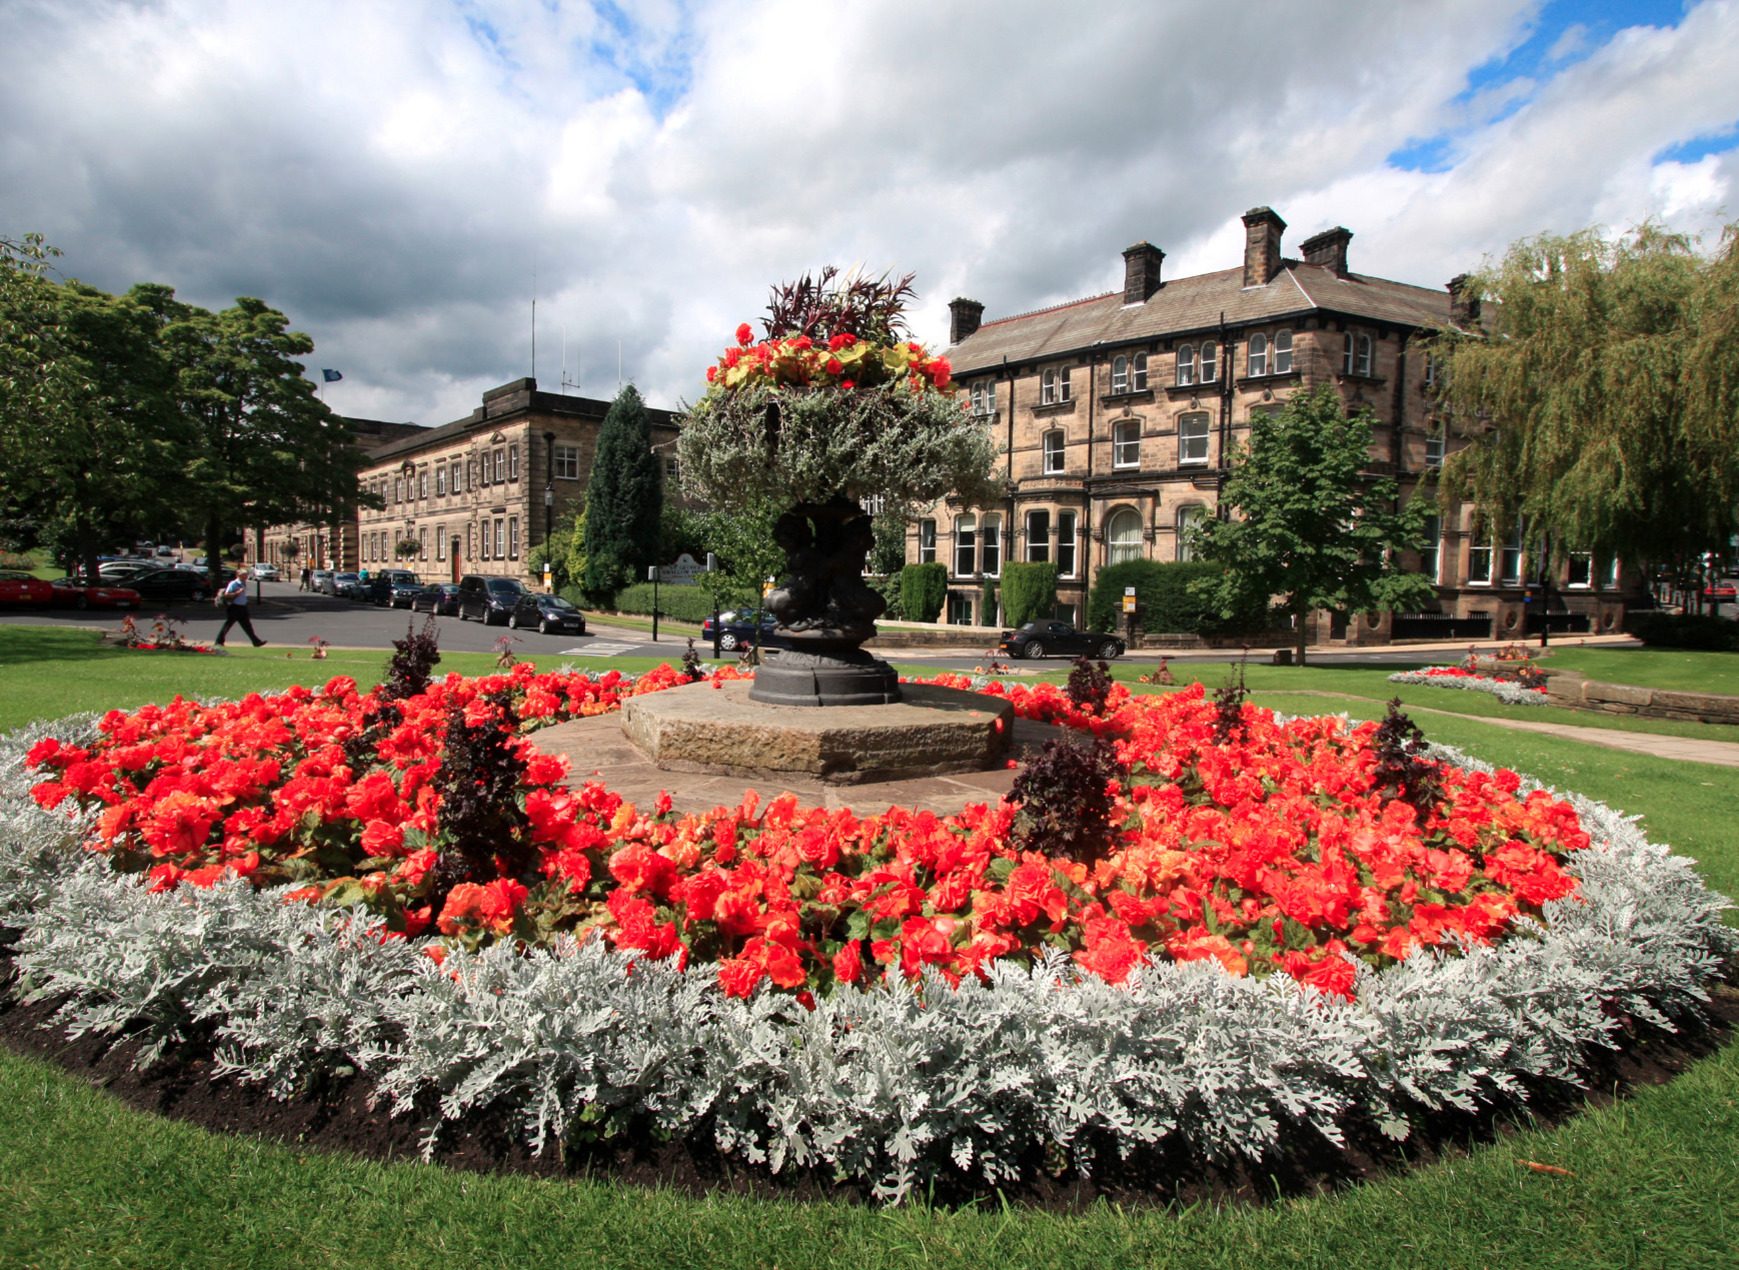 crescent gardens harrogate outside the council offices